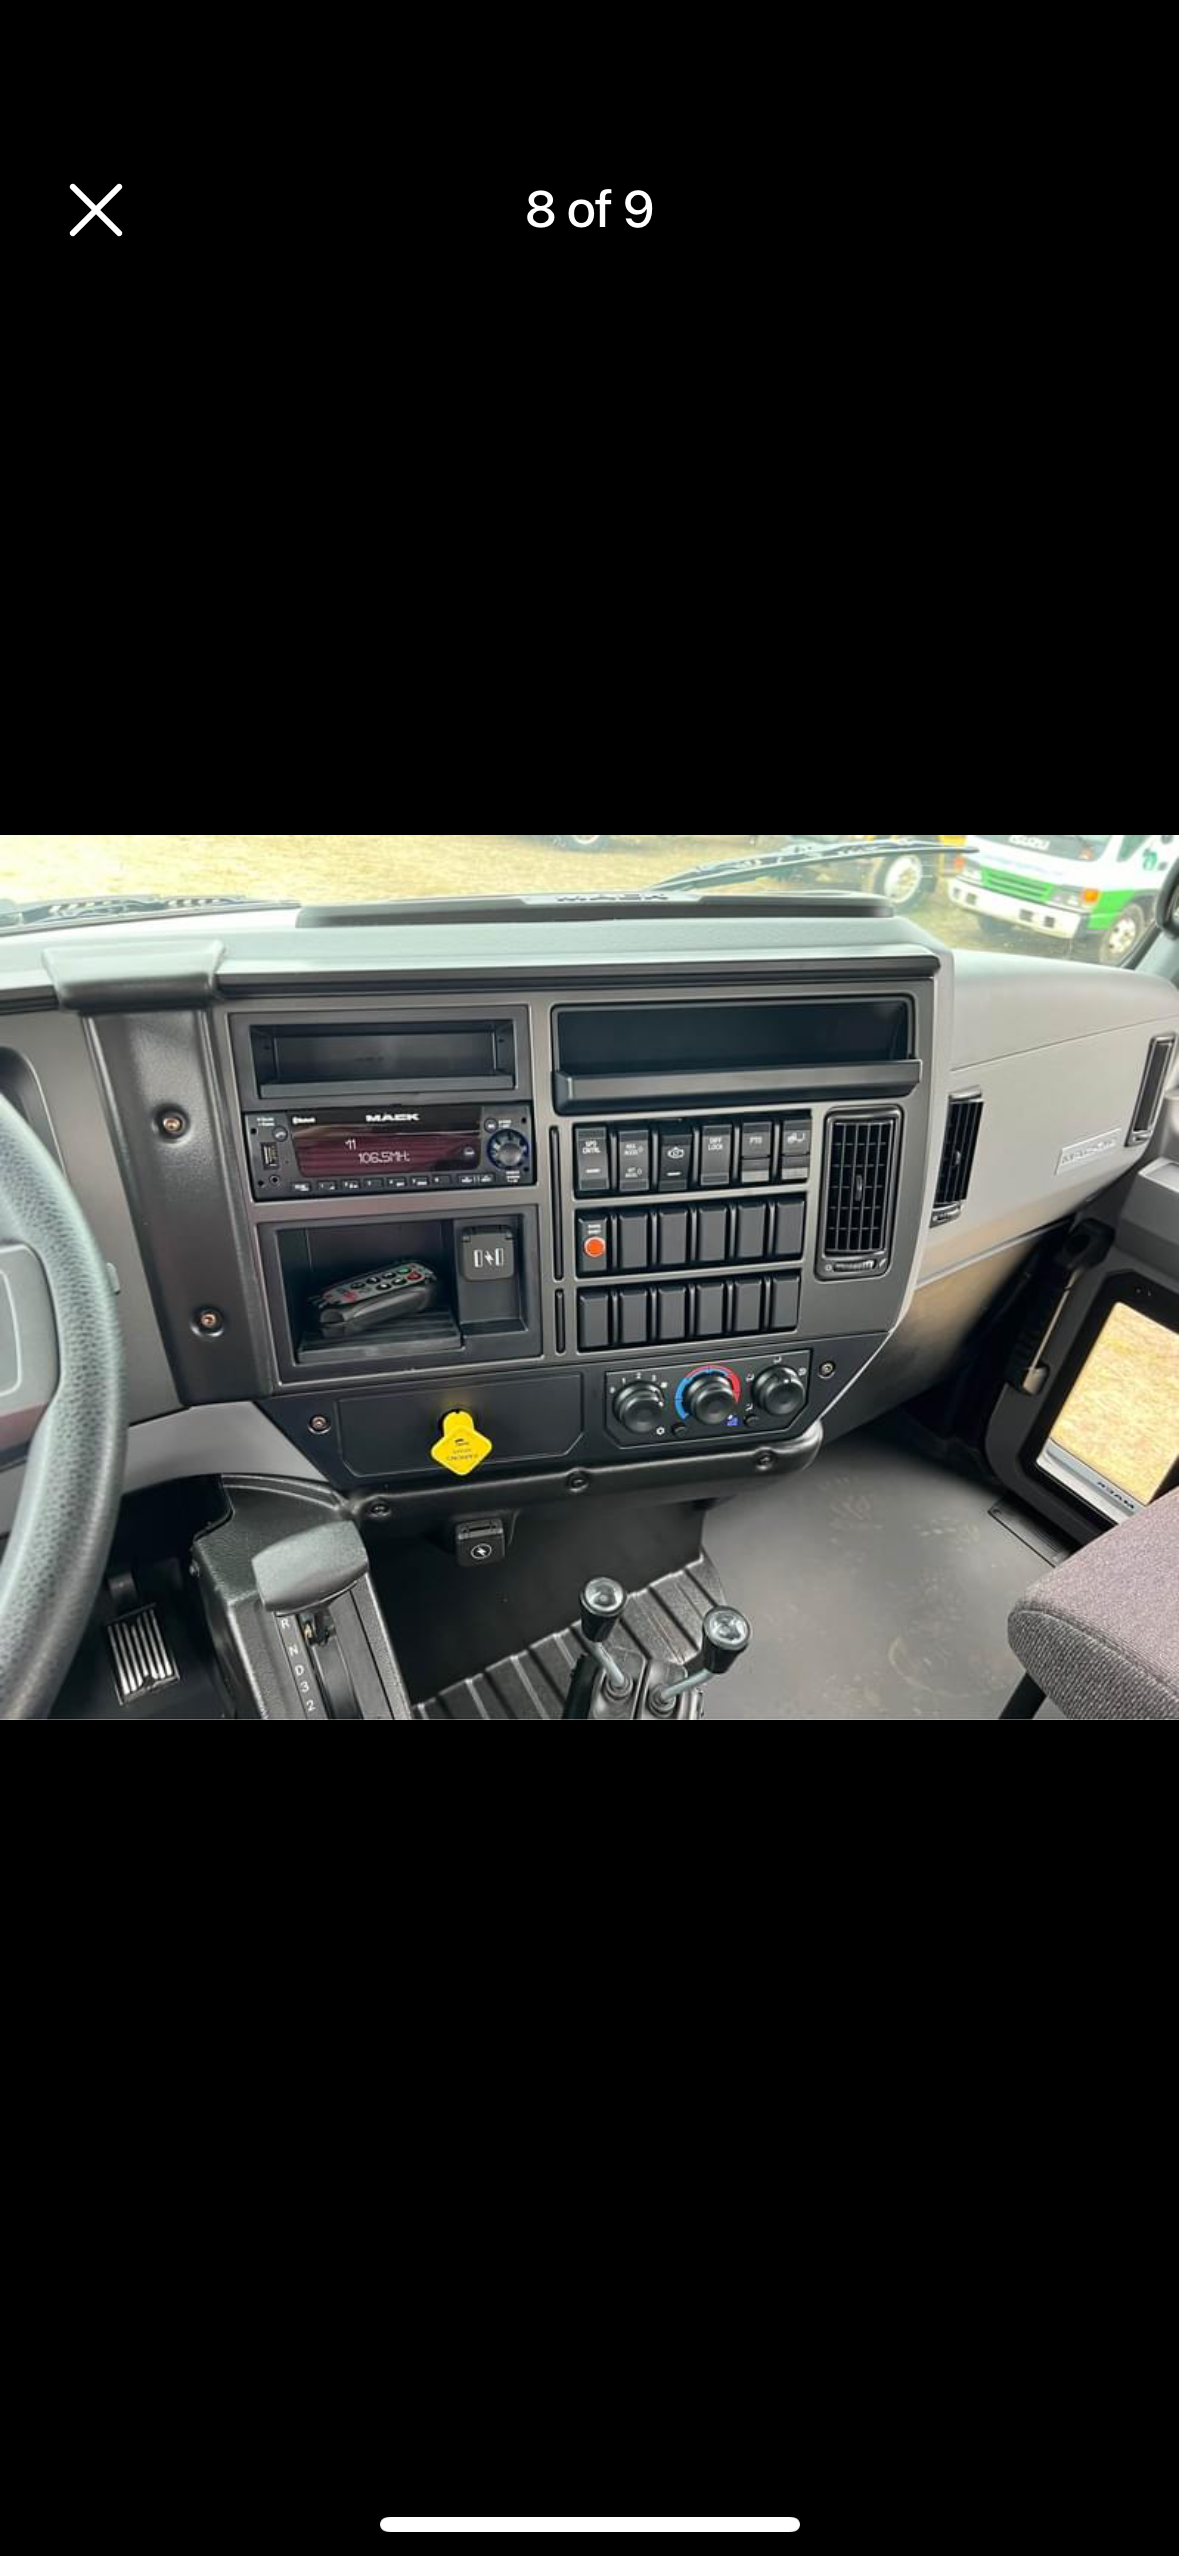 A close up of the dashboard of a truck.